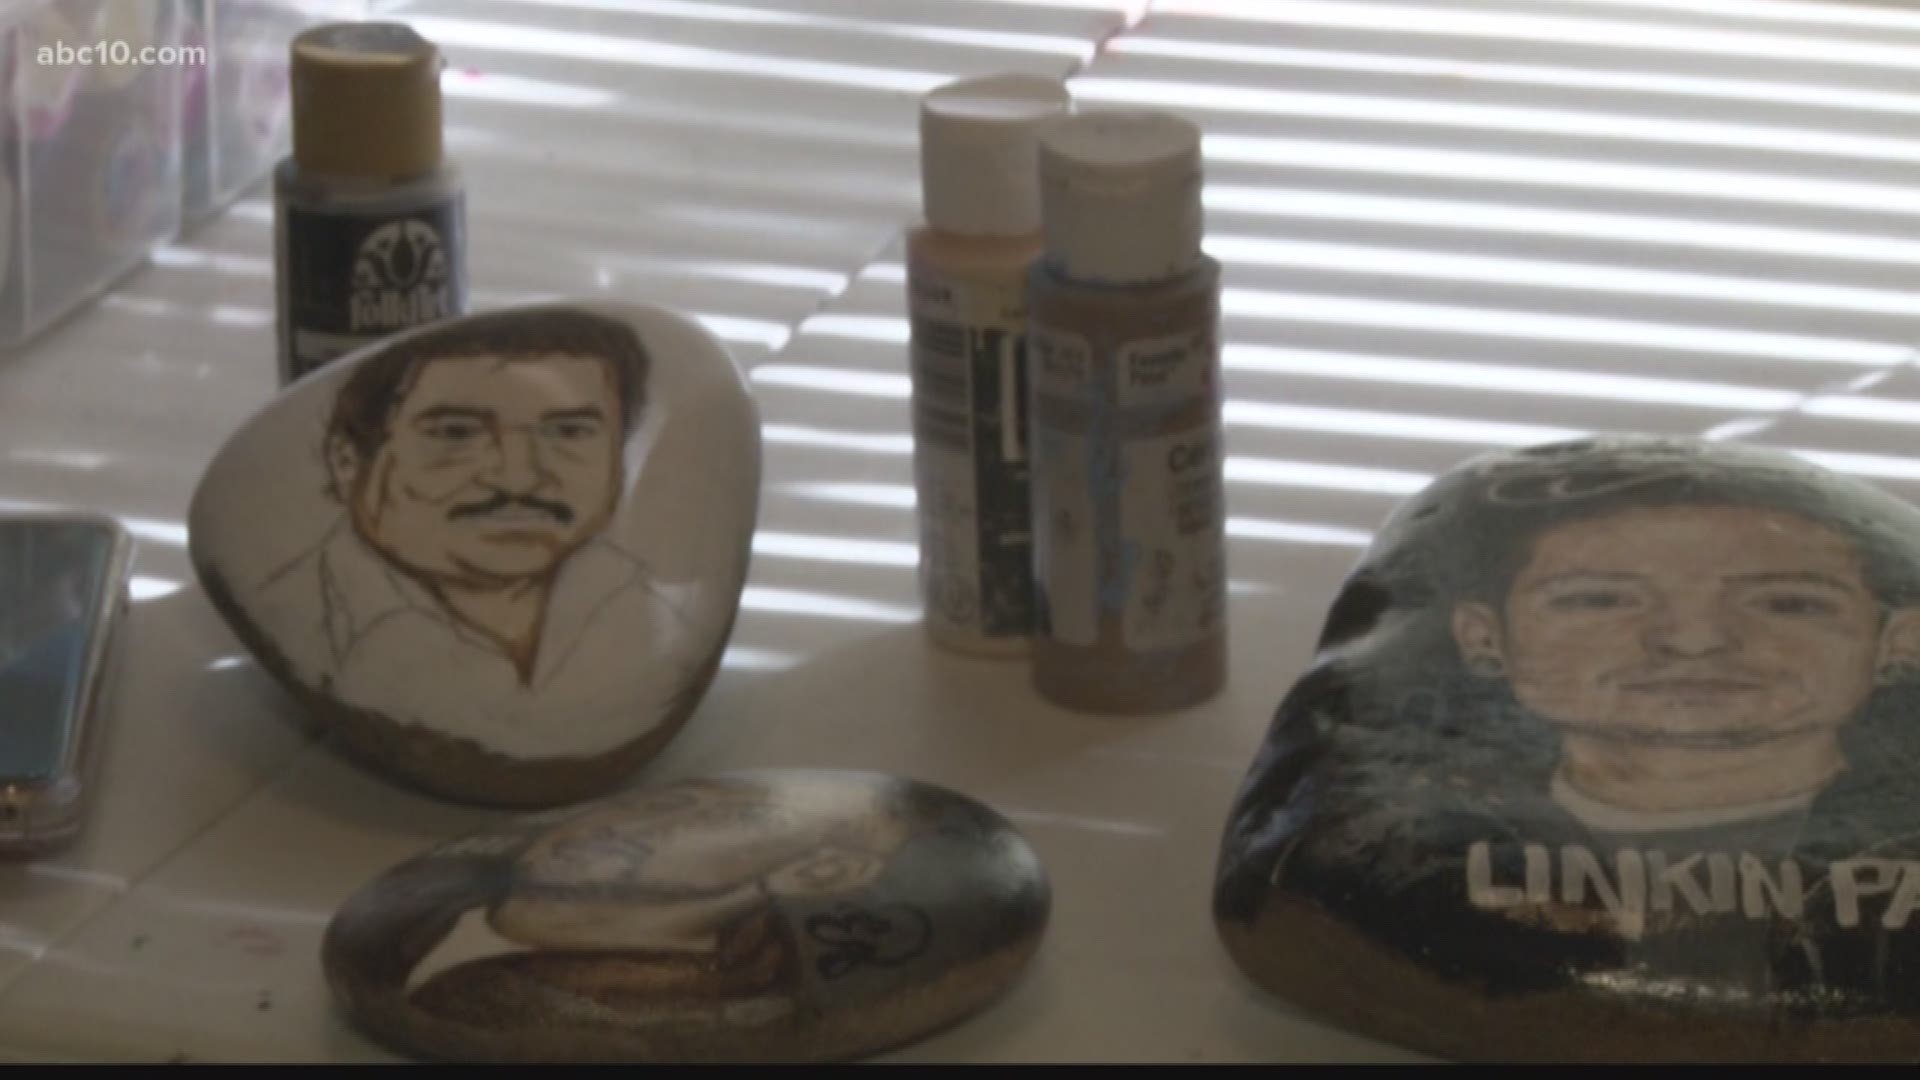 There's a trend growing across the country right now where people paint rocks to hide -- for others to find. But in Stockton, one woman says she never expected the game to get so big.